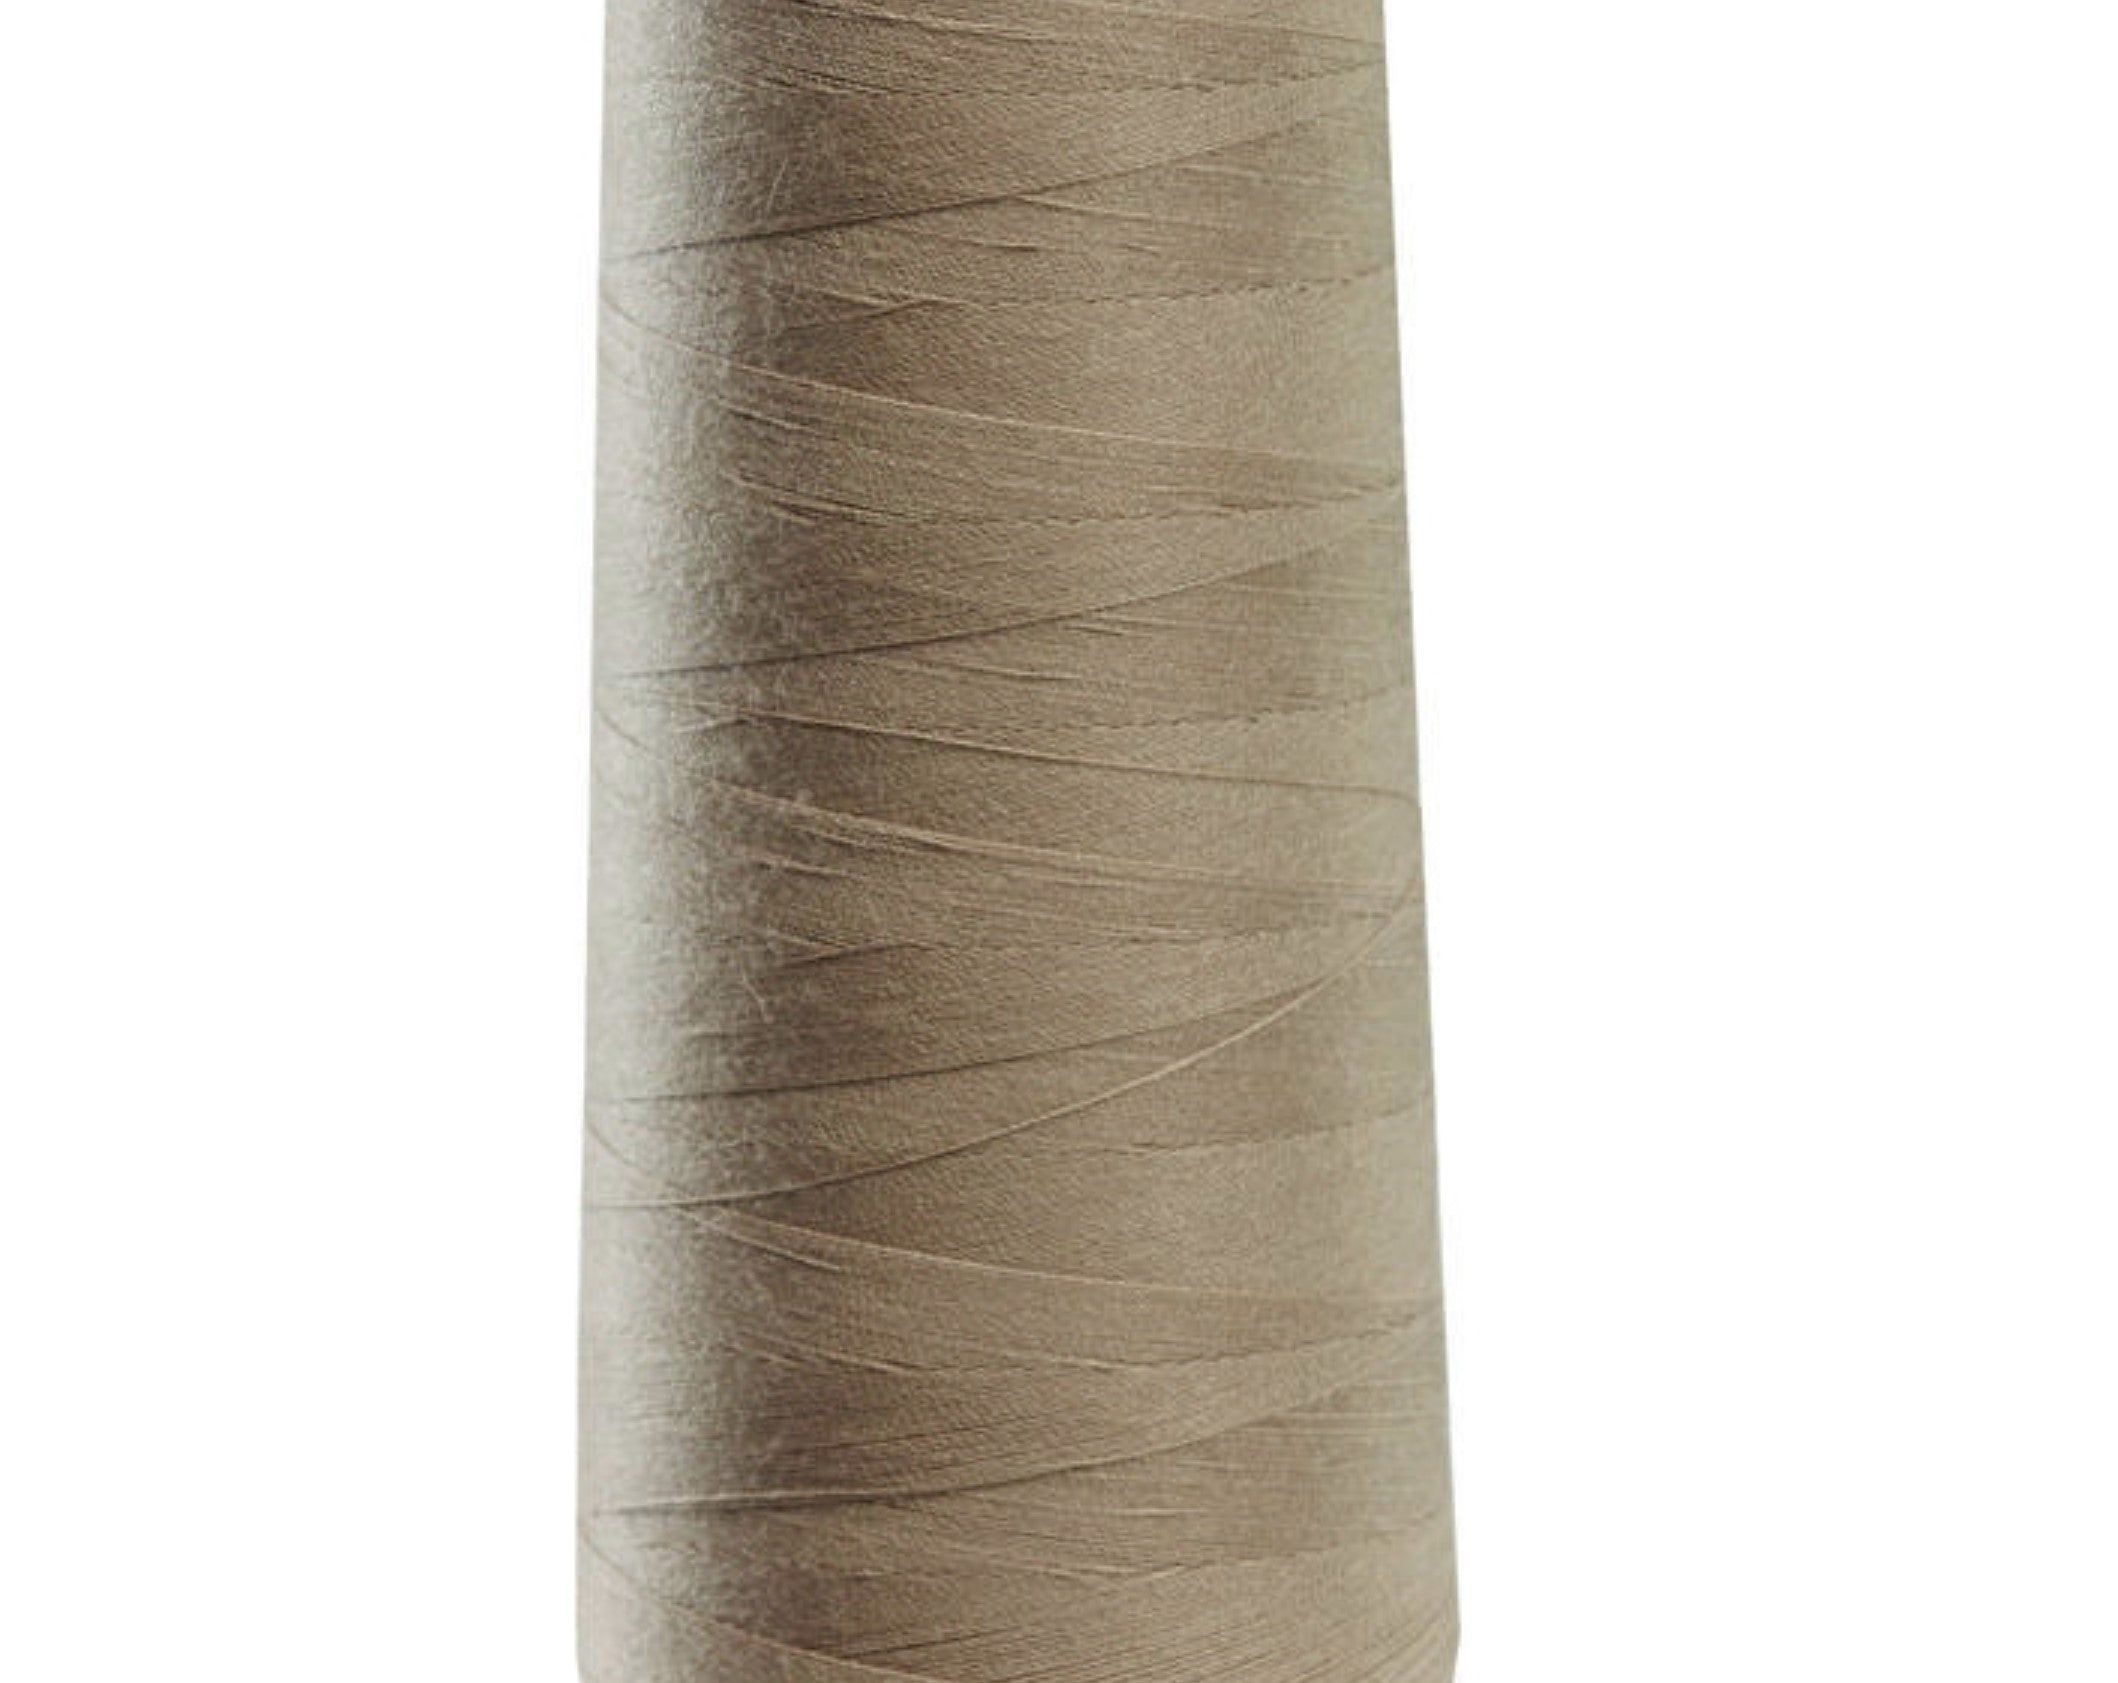 Taupe Color, Aerolock Premium Serger Thread, Ref. 9270 by Madeira®